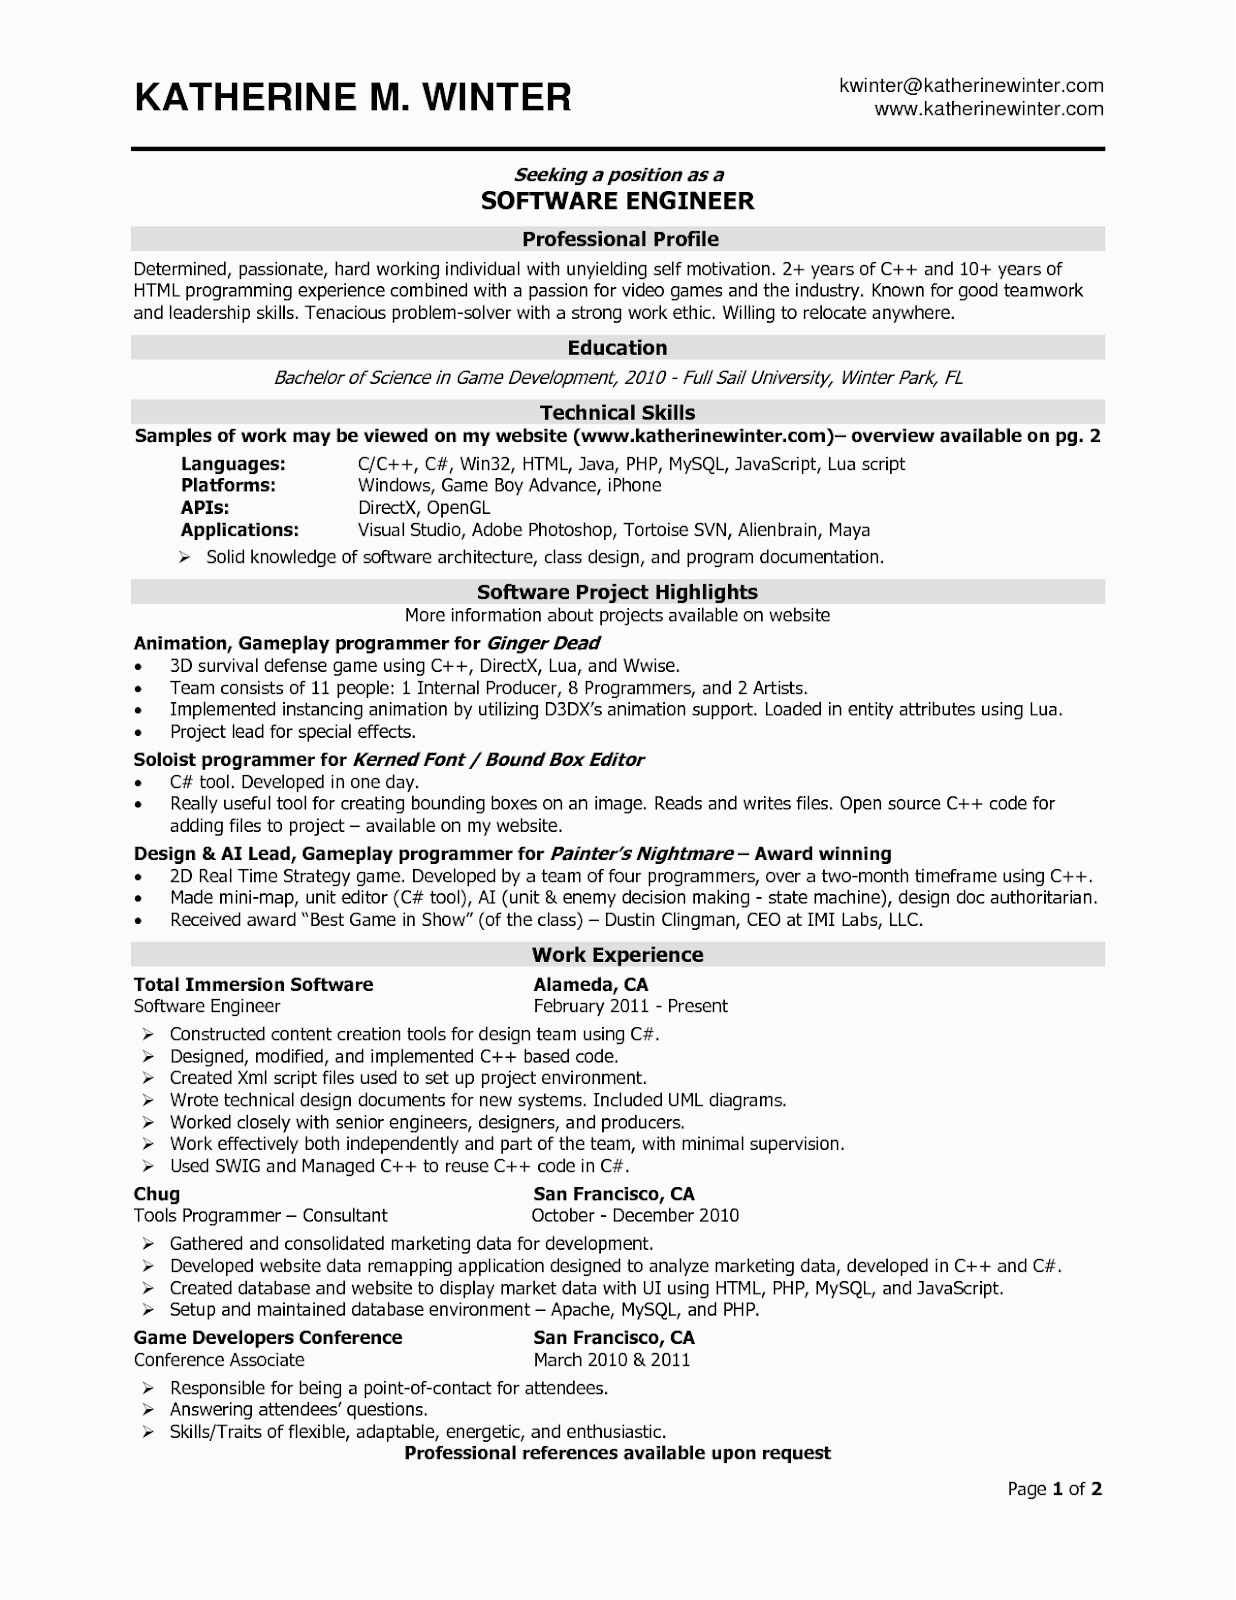 Best Resume Templates for software Engineers software Engineer Resume Samples